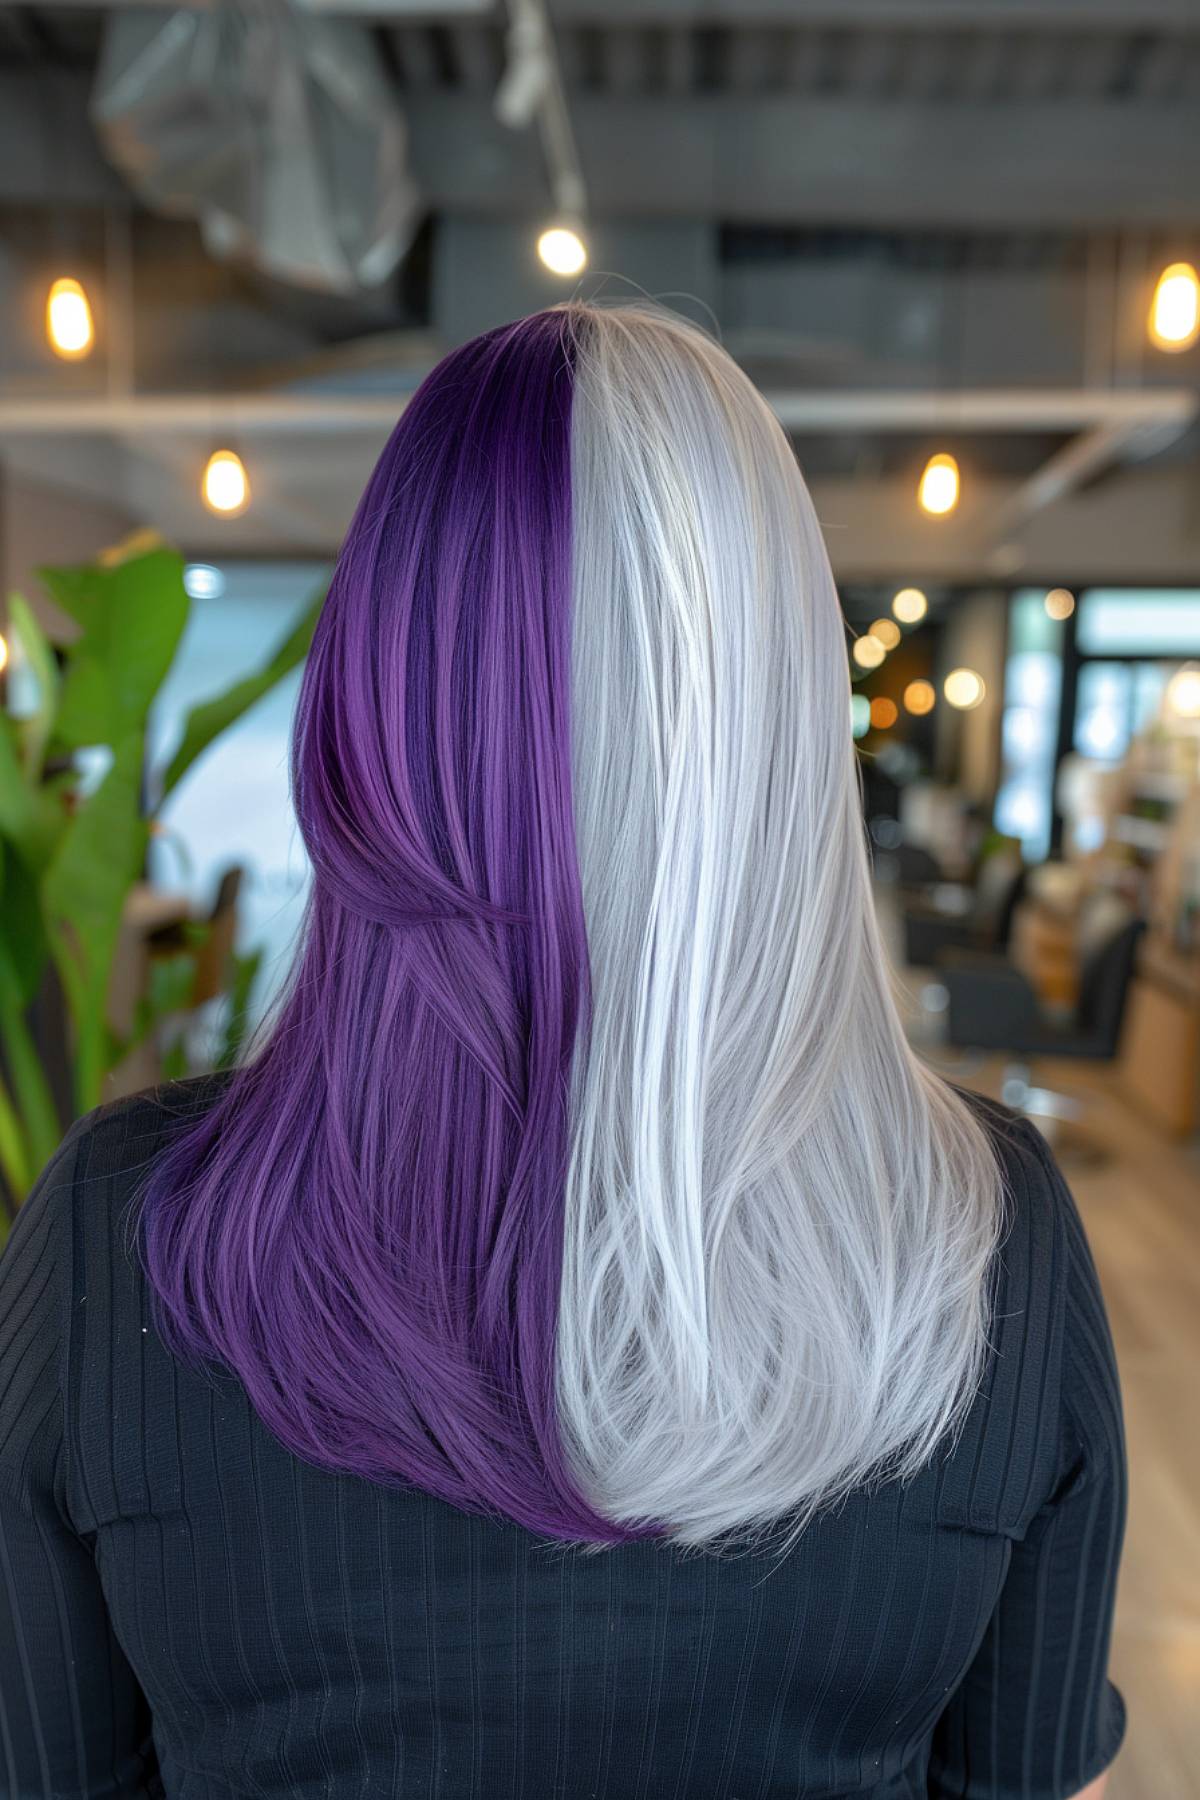 Long sleek hair with a blend of icy silver and deep violet, ideal for a modern Gemini-inspired style.